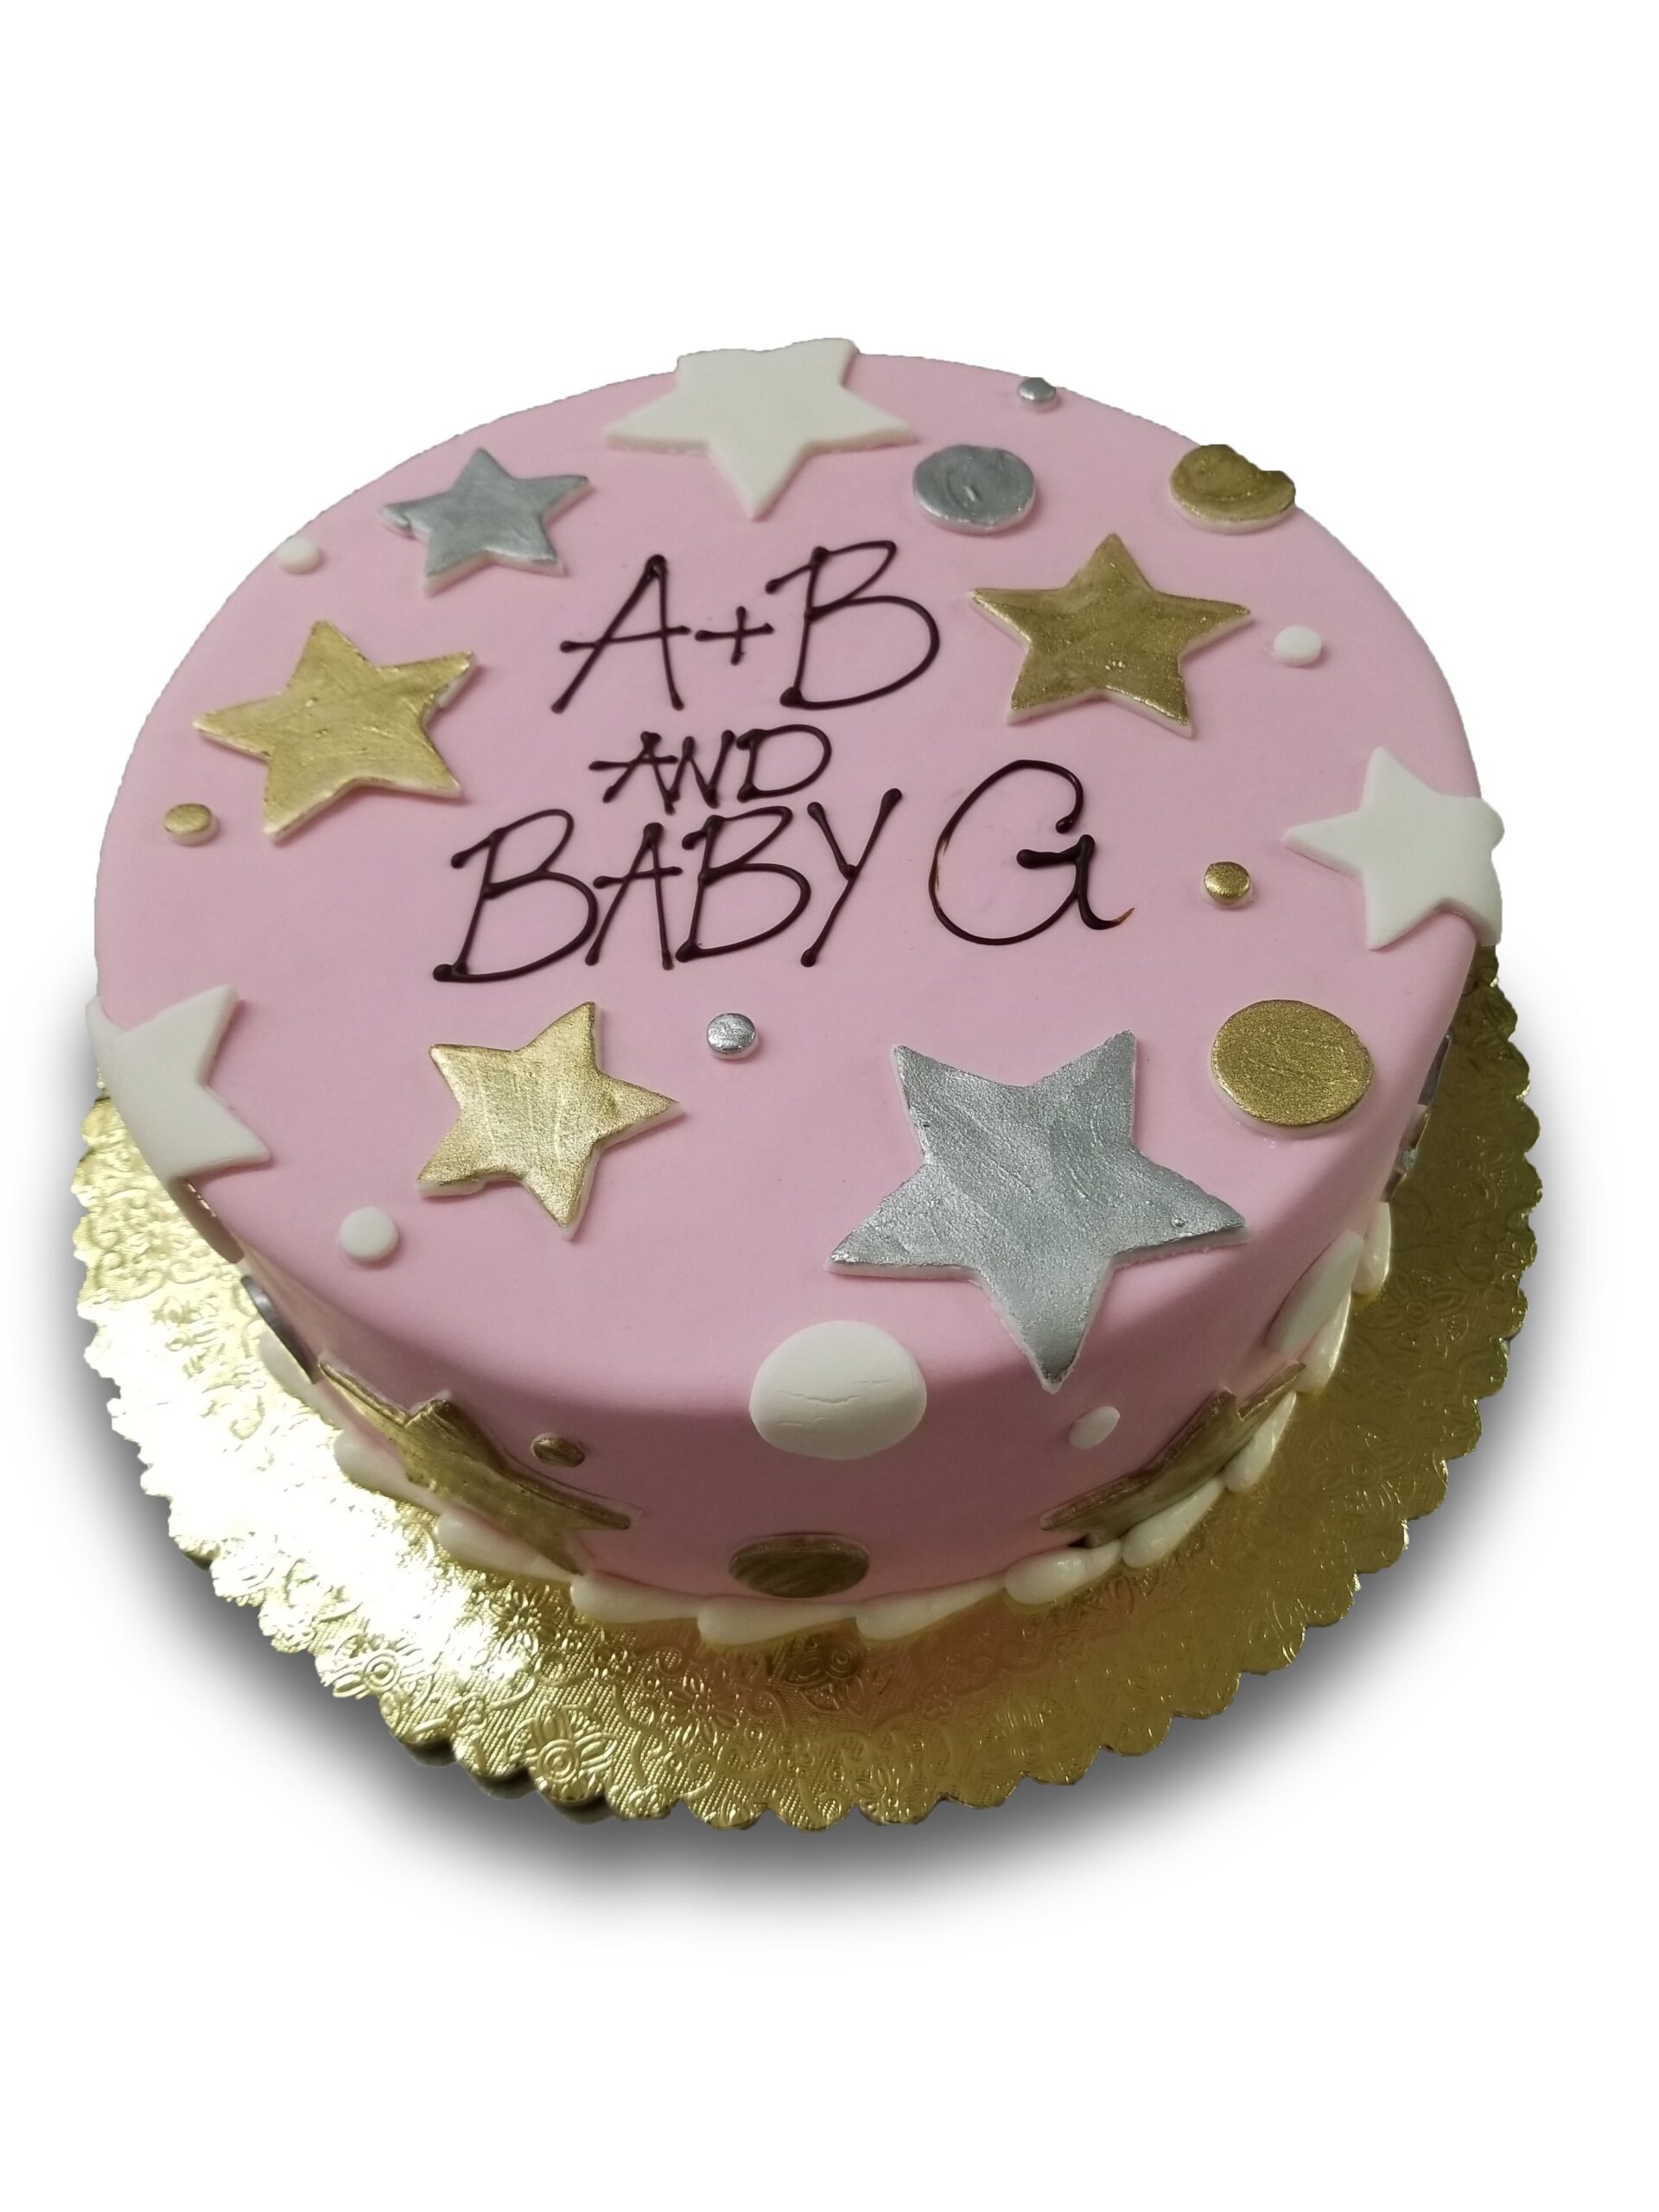 BS06. Gold and silver fondant stars and dots on a pink fondant covered cake